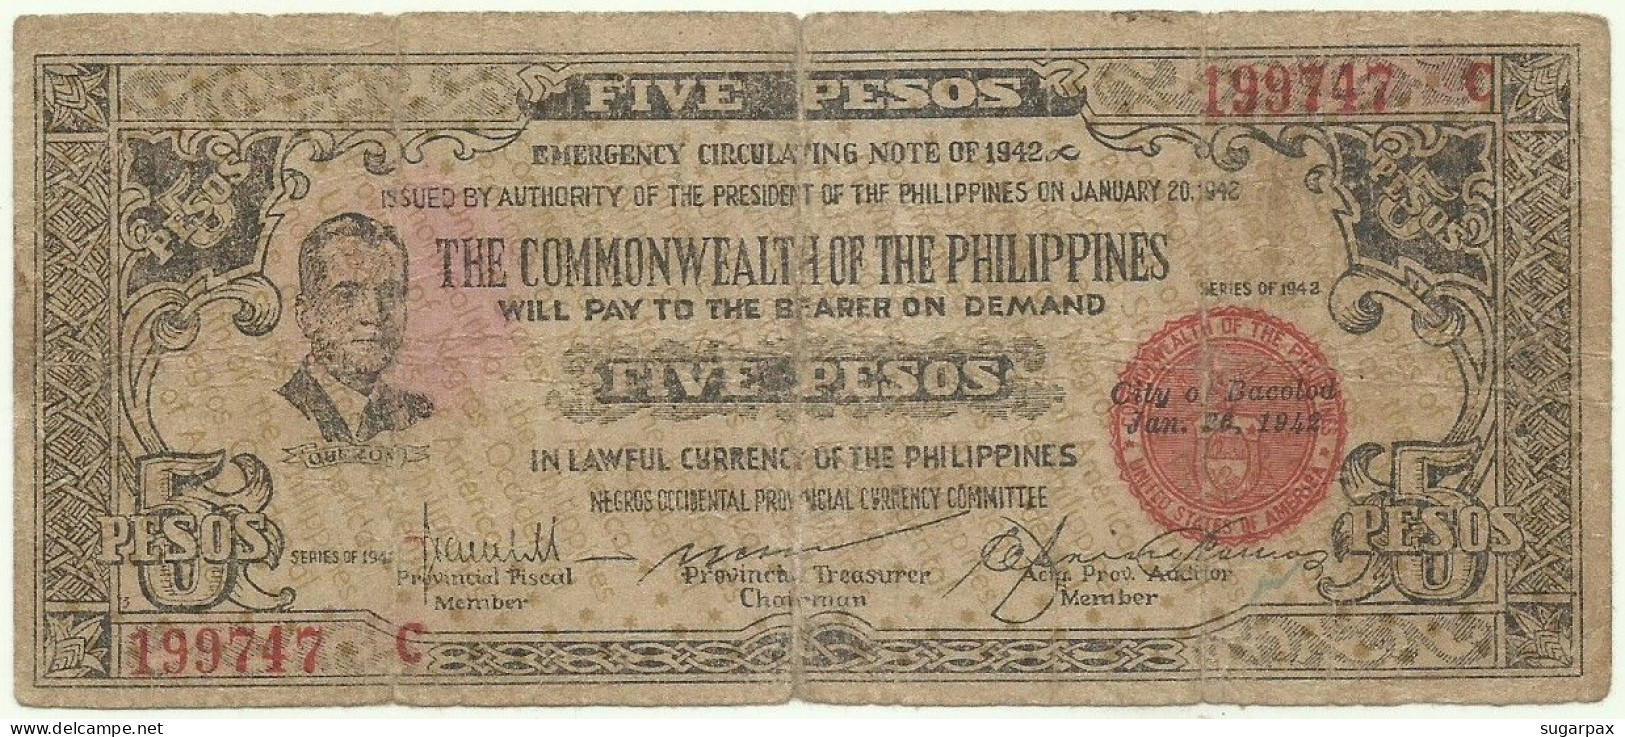 PHILIPPINES - 5 Pesos - 1942 - Pick S 648.a - Serie C - NEGROS Occidental Provincial Currency Committee - Philippinen